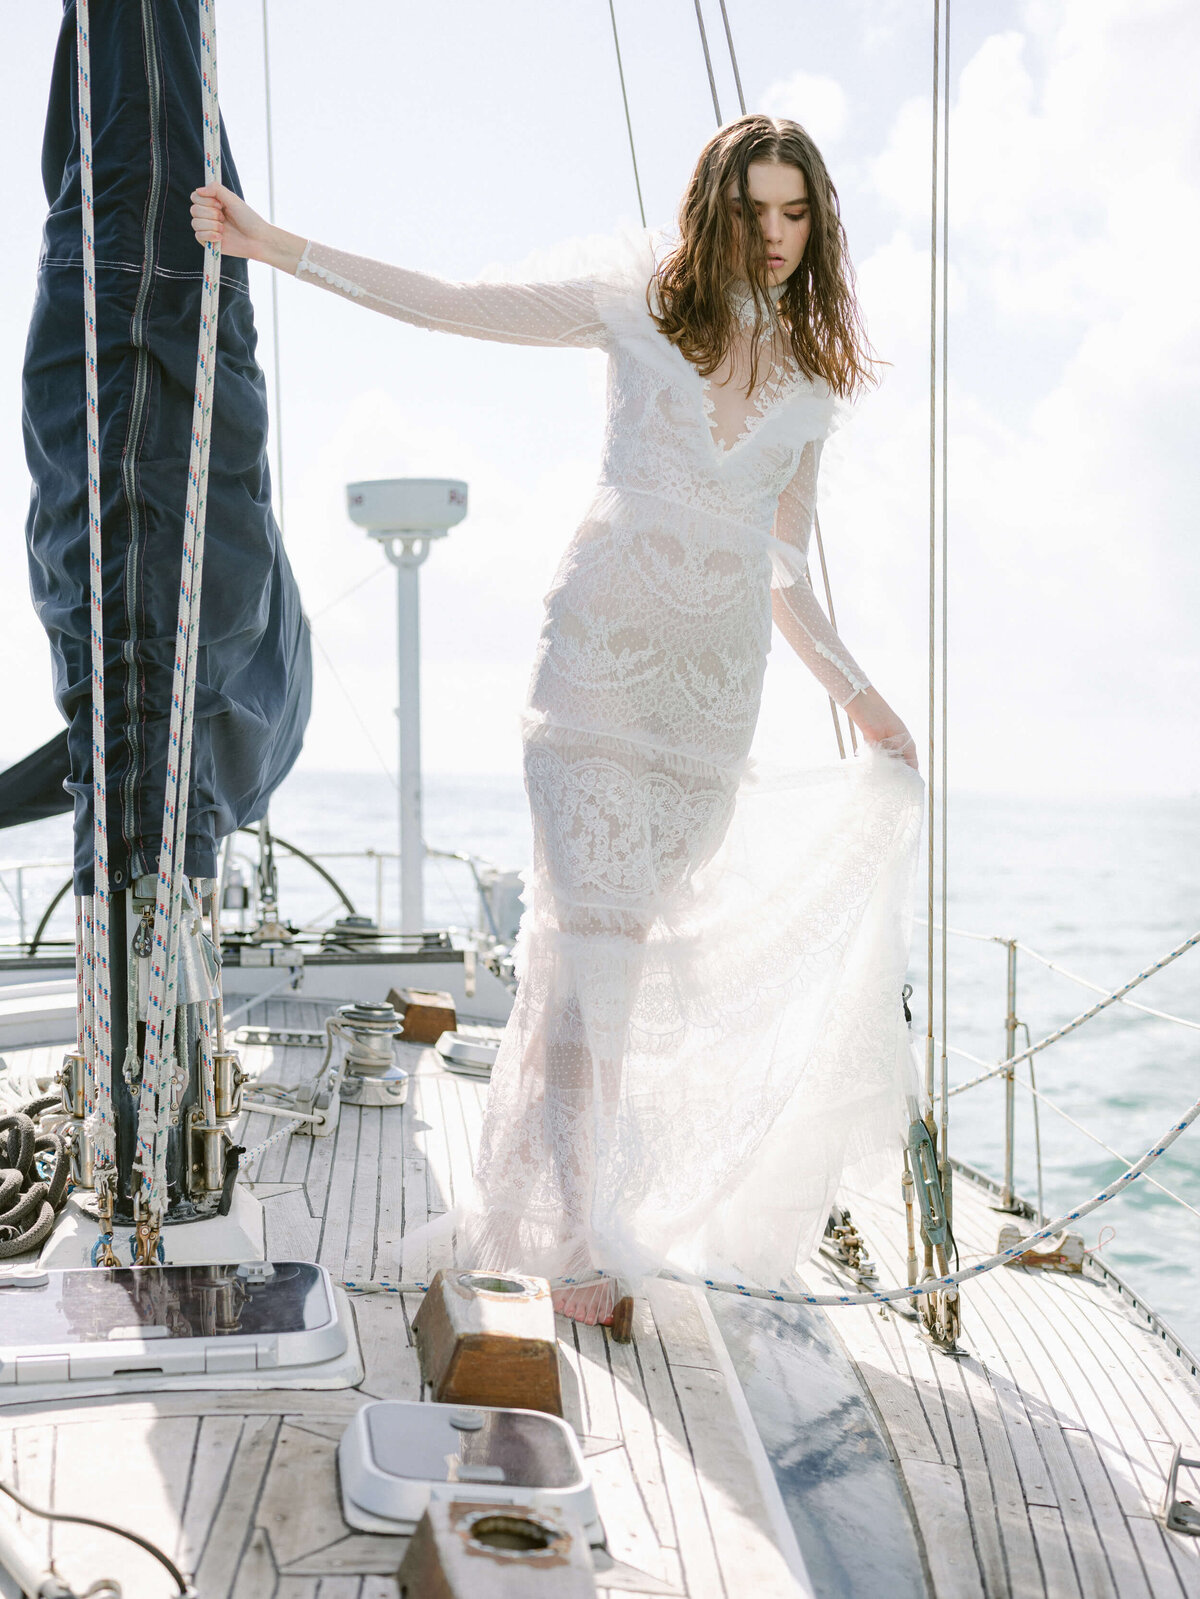 27-KT-Merry-bridal-couture-editorial-viktor-rolf-mariage